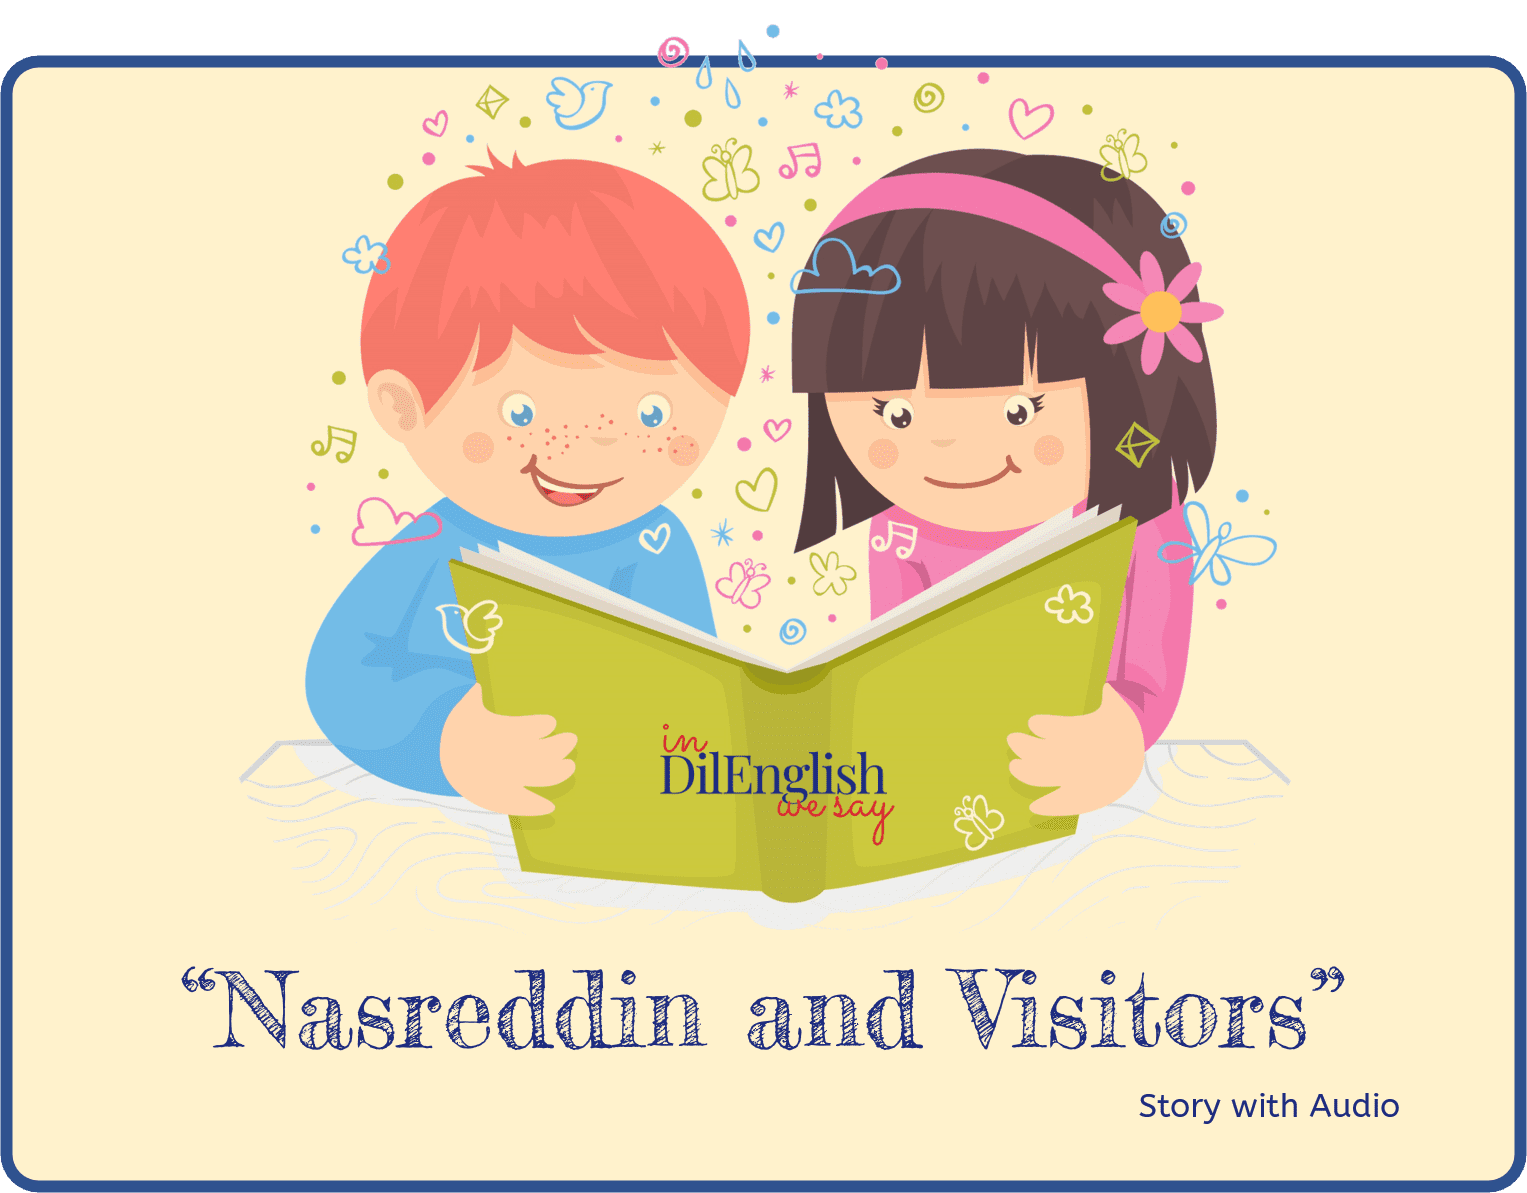 Nasreddin-and-visitors-listen-and-read-exercise-learn-english